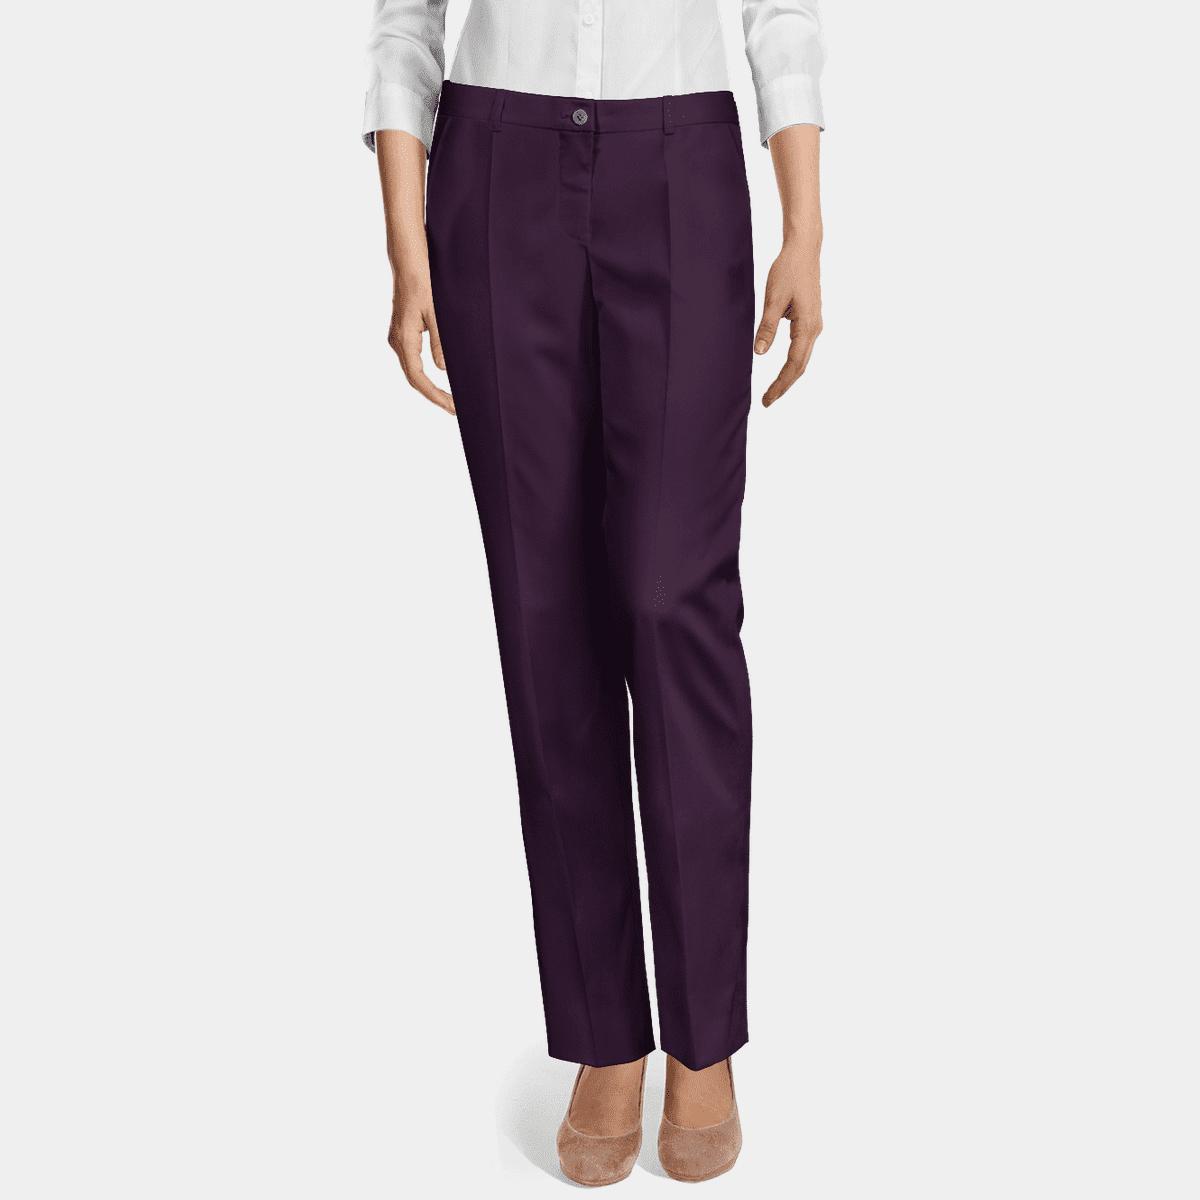 Plus Size Pants for Women - Sumissura